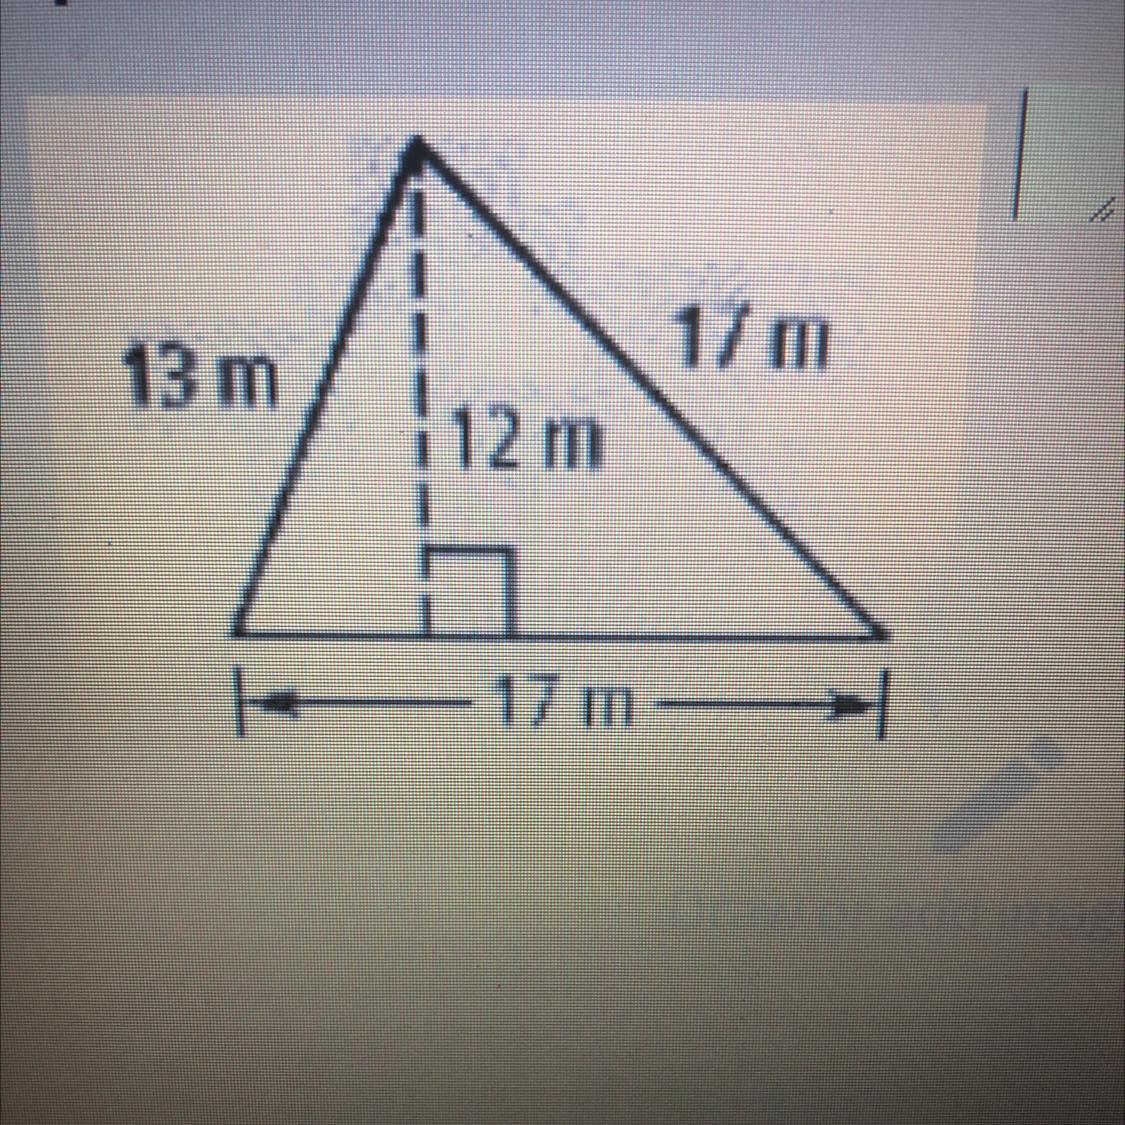 Please Help Me It Would Mean The World. Extra Points!The Answer Is 102m^2 Provided By My Teacher I Just